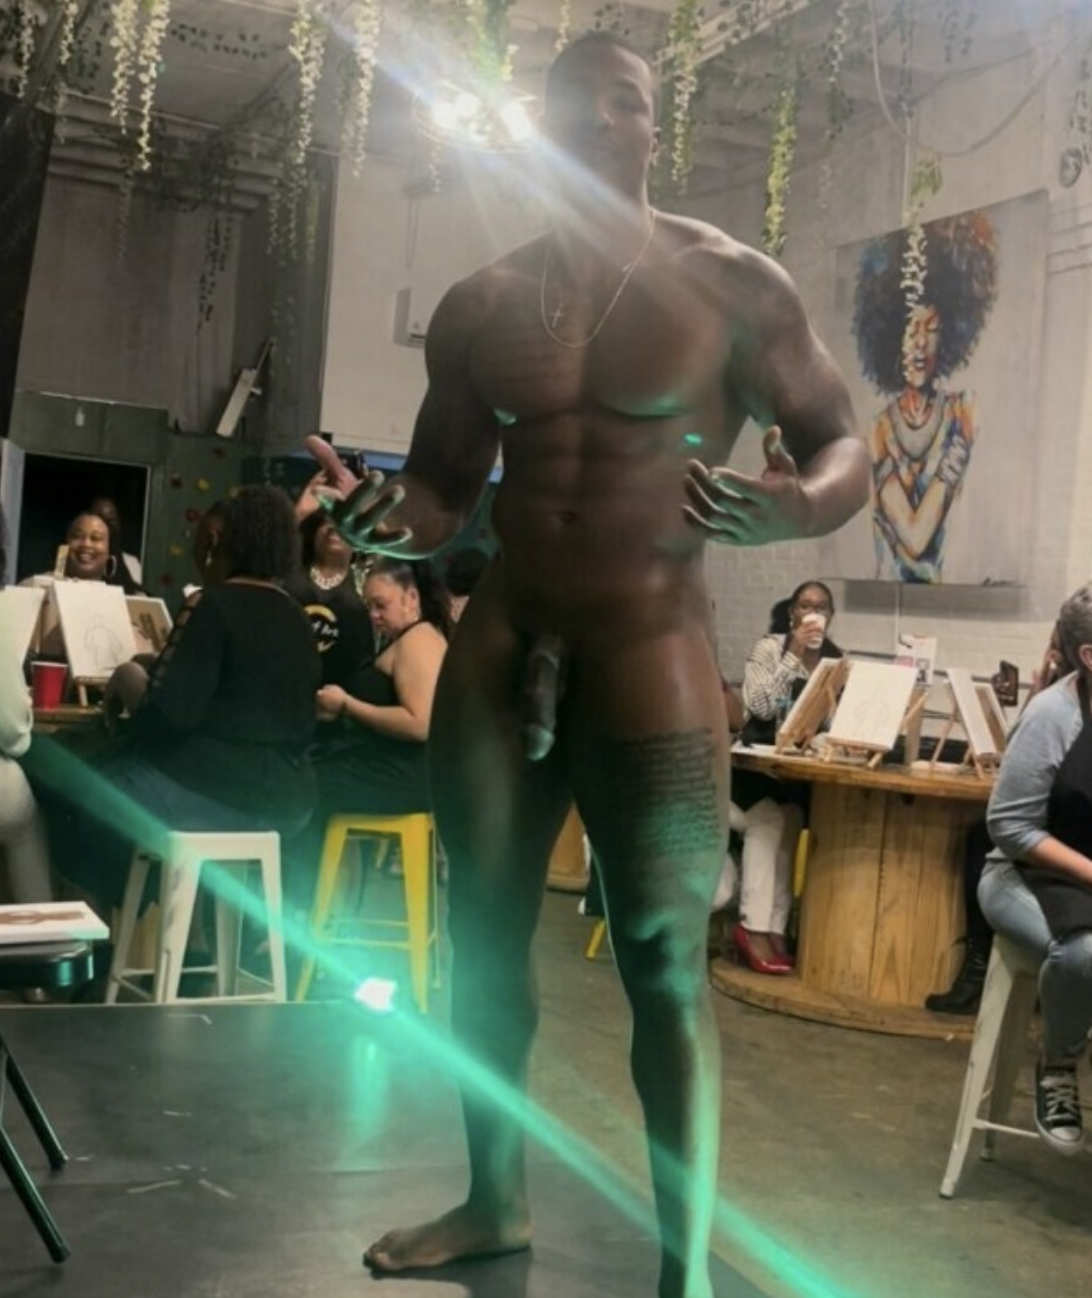 Chauncey Palmer lets it all hang out at a life drawing class